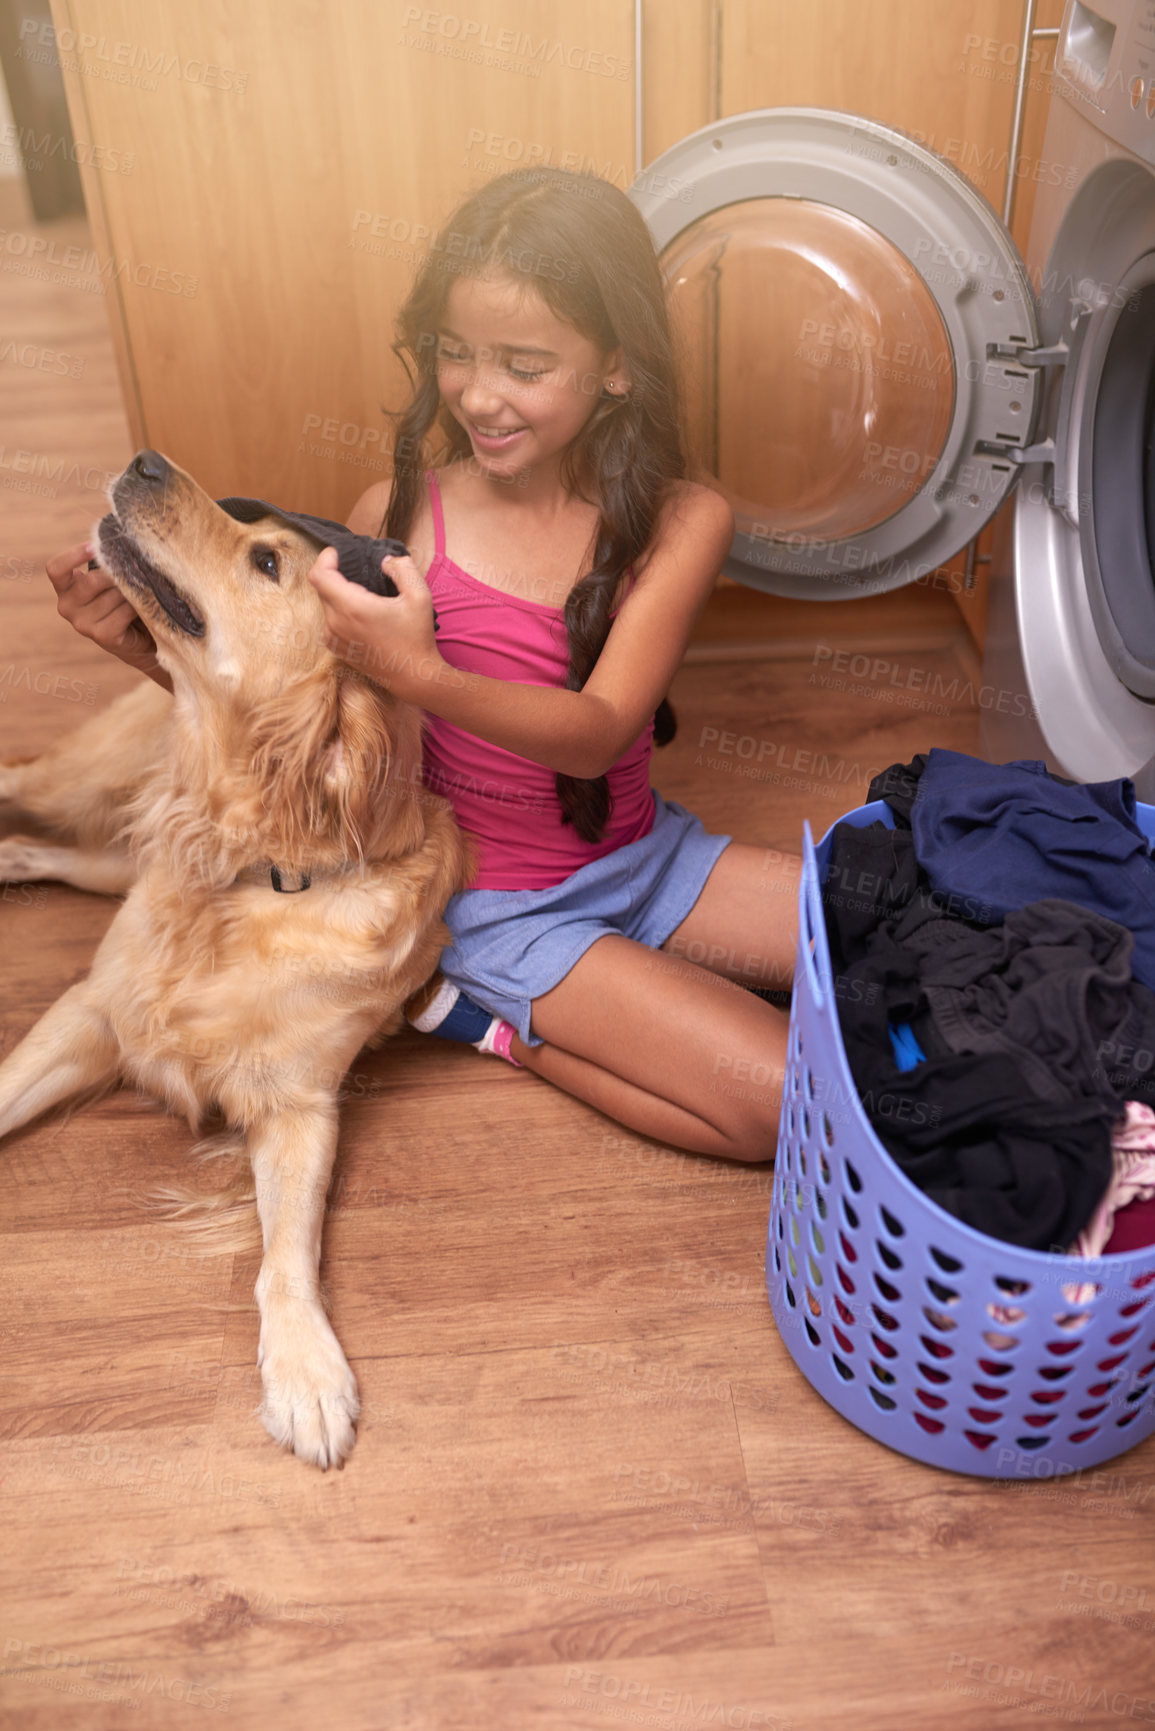 Buy stock photo Washing machine, dog and child with laundry in home for cleaning clothes and housekeeping. Happy, hygiene and young girl kid with basket of clothing for playing and bonding with pet puppy at home.